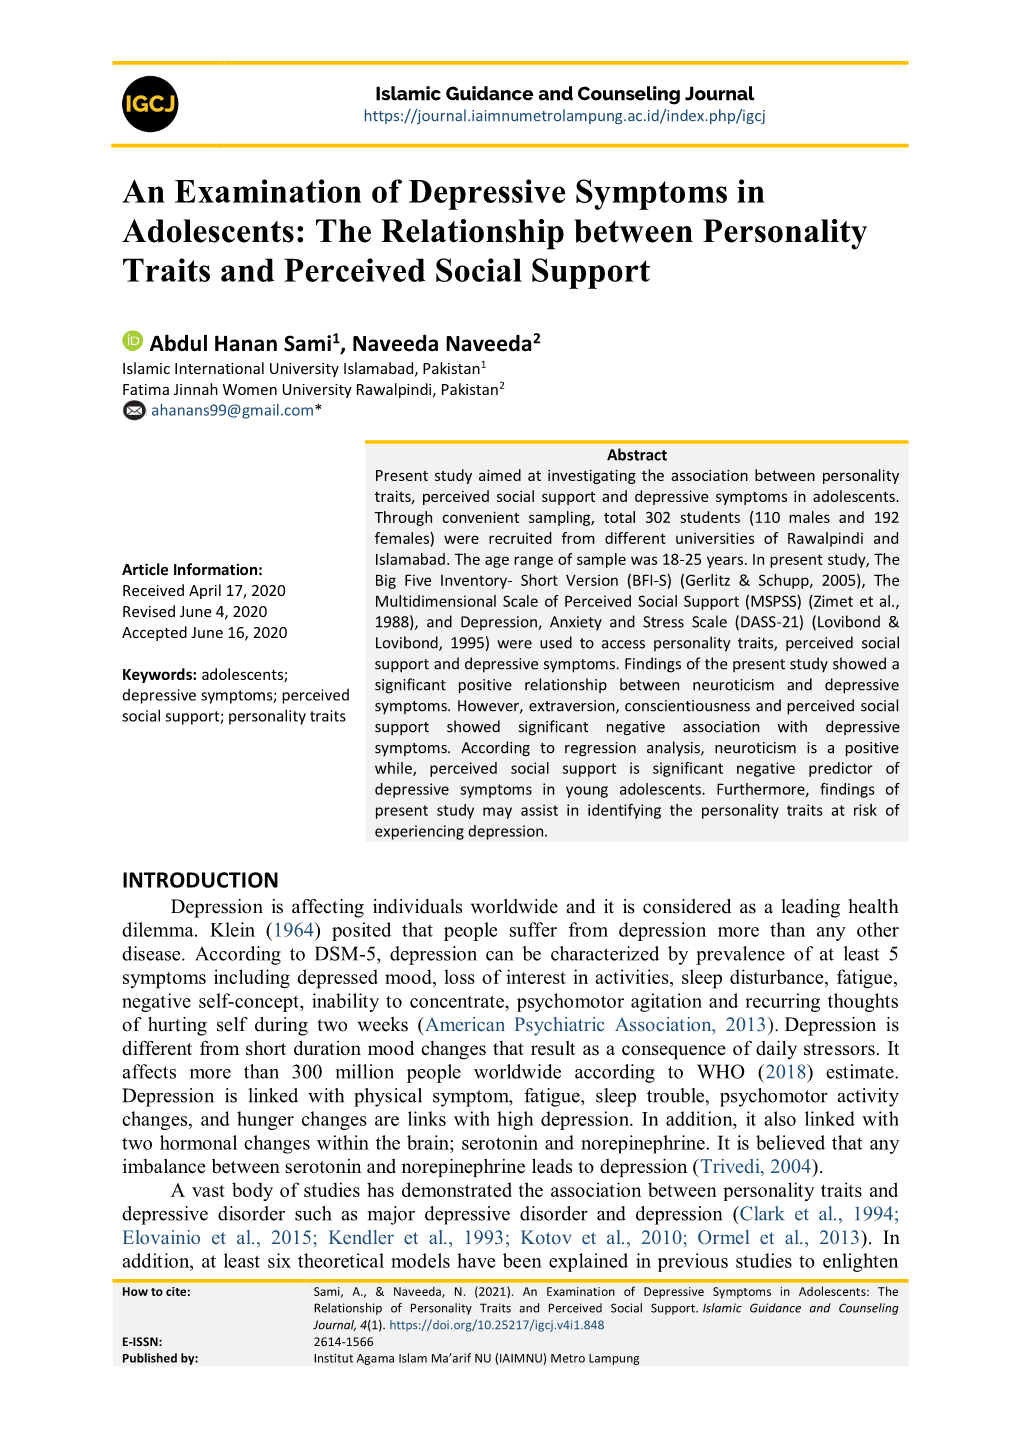 The Relationship Between Personality Traits and Perceived Social Support